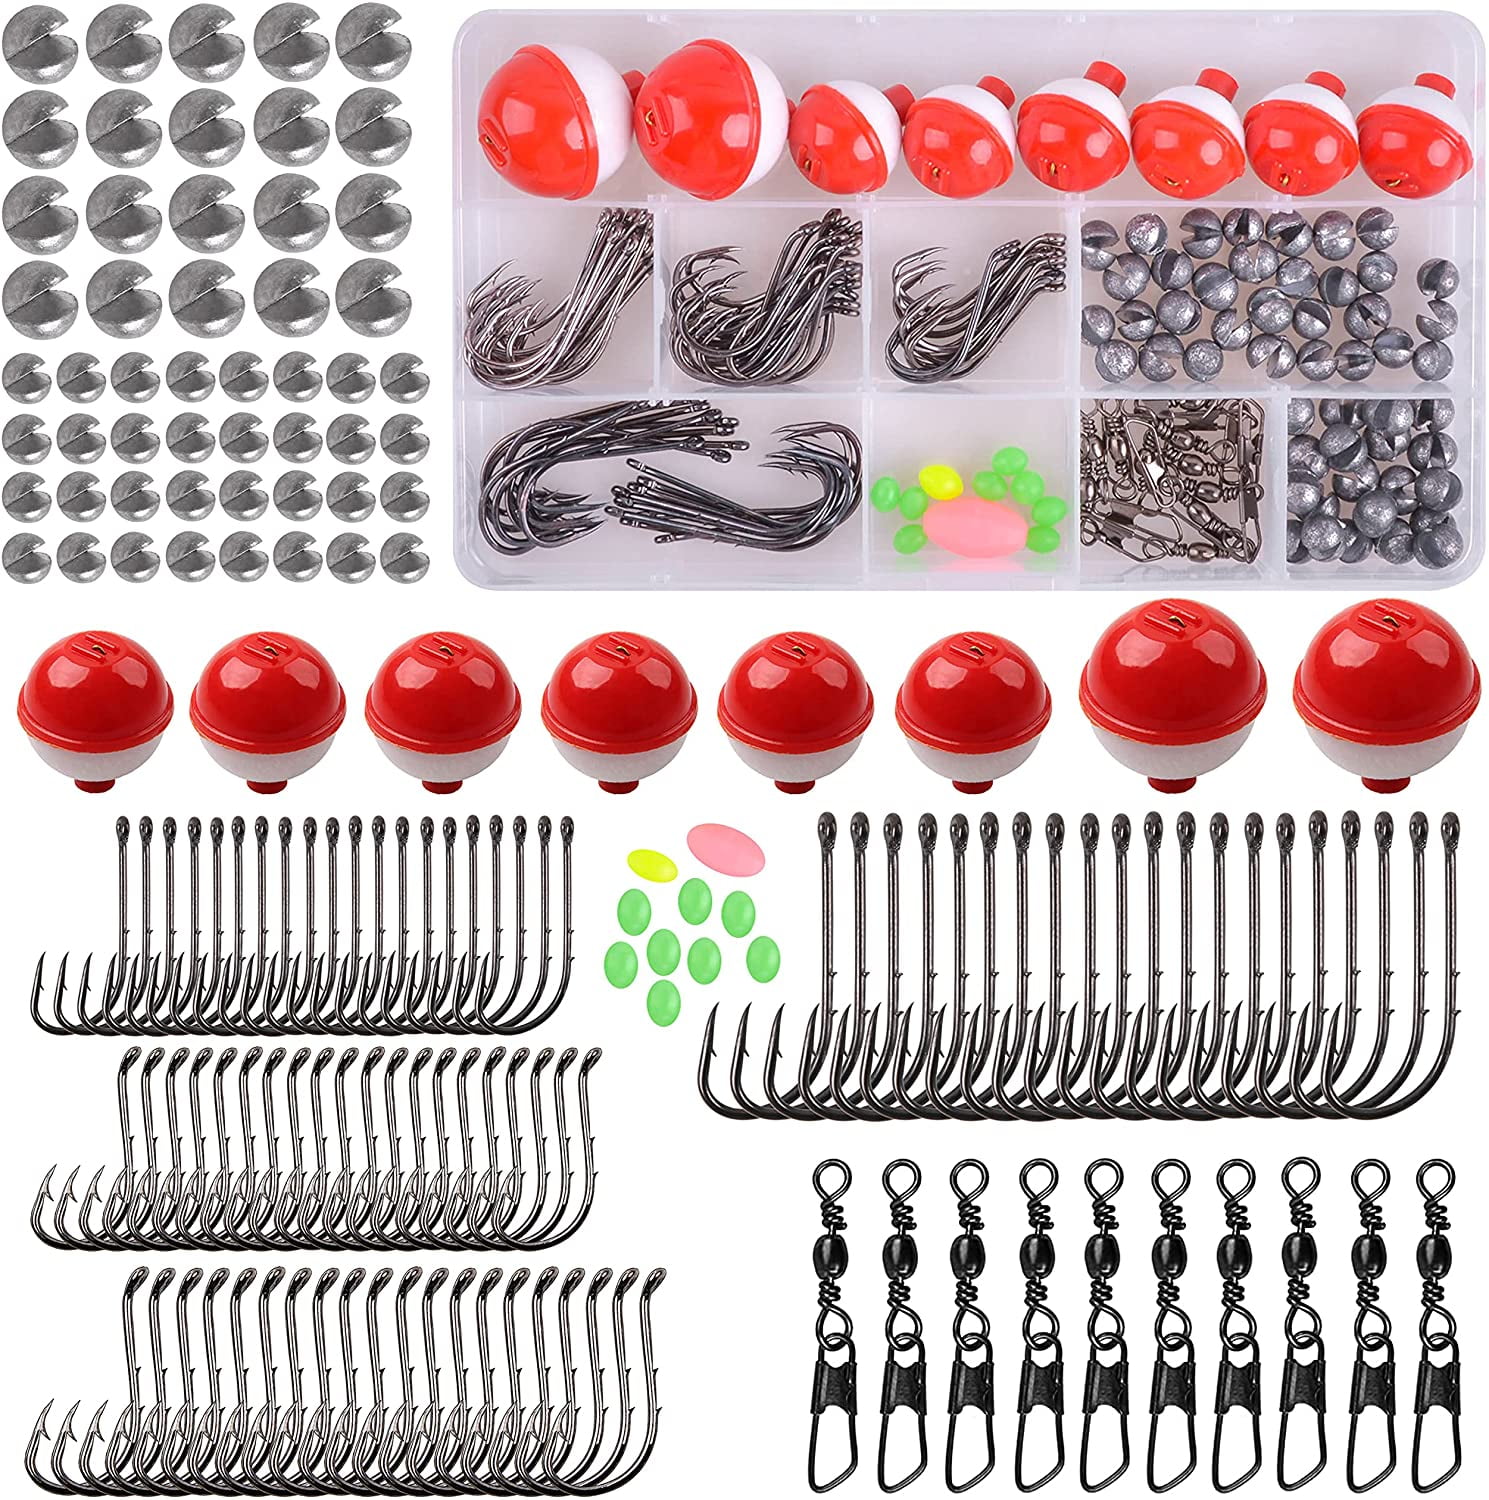 Sporting 52 Pcs/set Lead Sheet Strips Fishing Tackle Sinkers Weights Accessories 